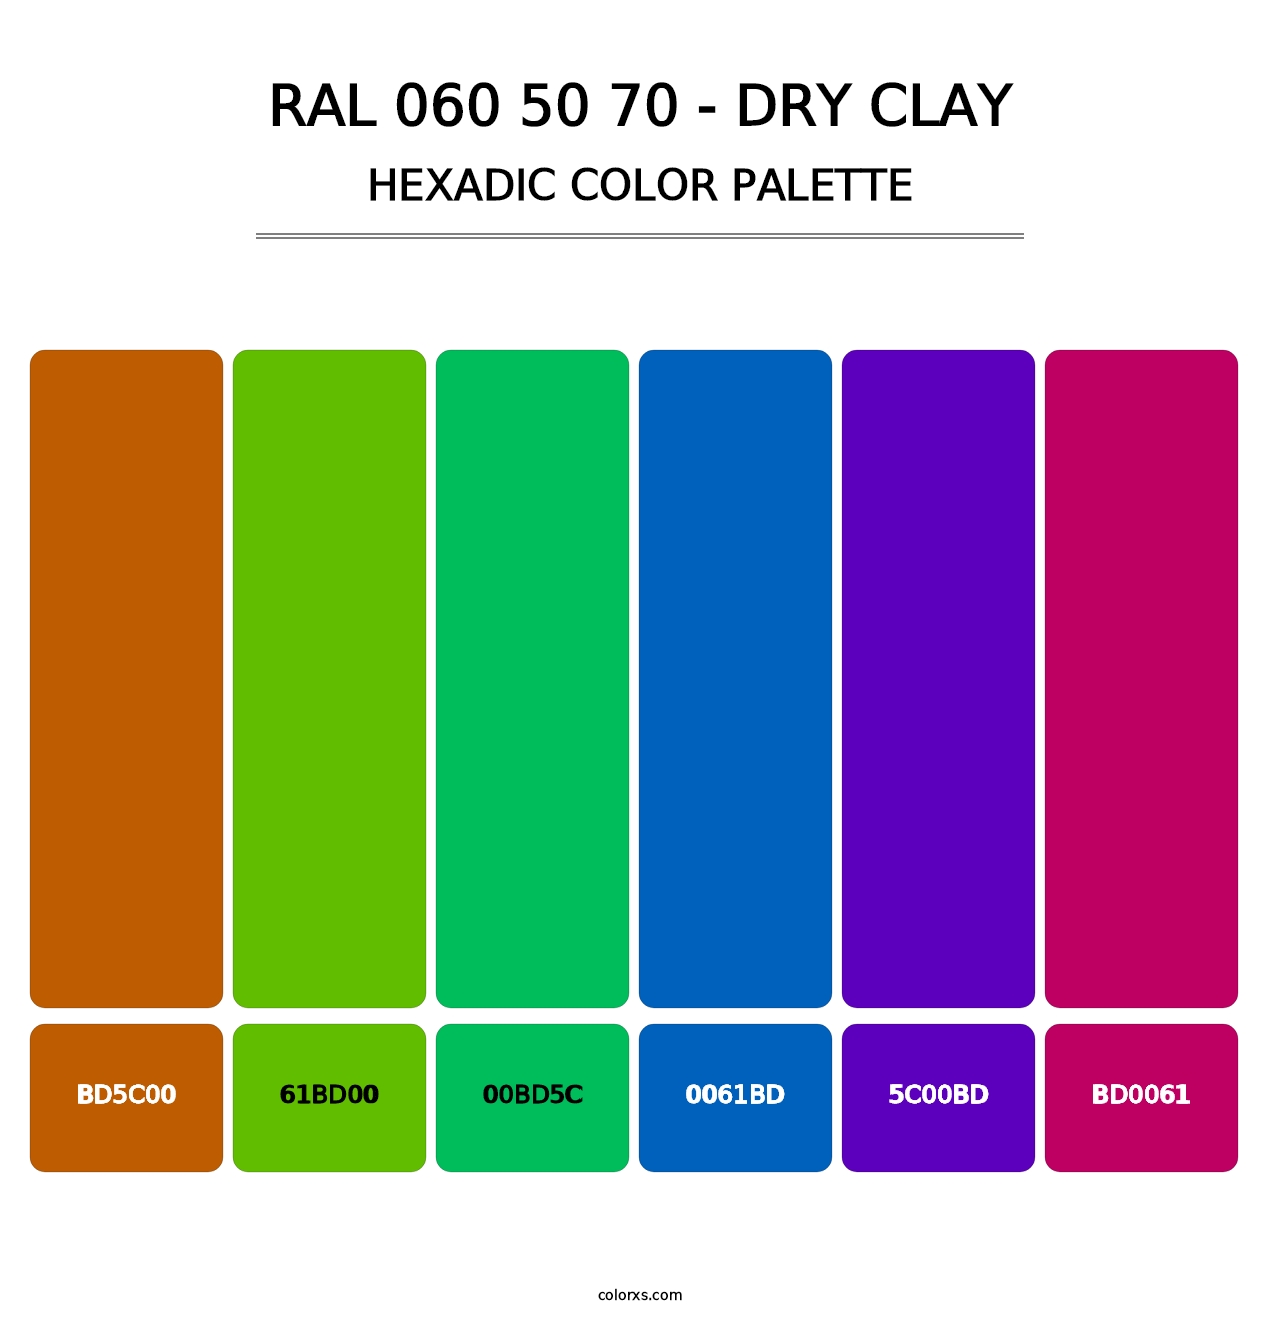 RAL 060 50 70 - Dry Clay - Hexadic Color Palette